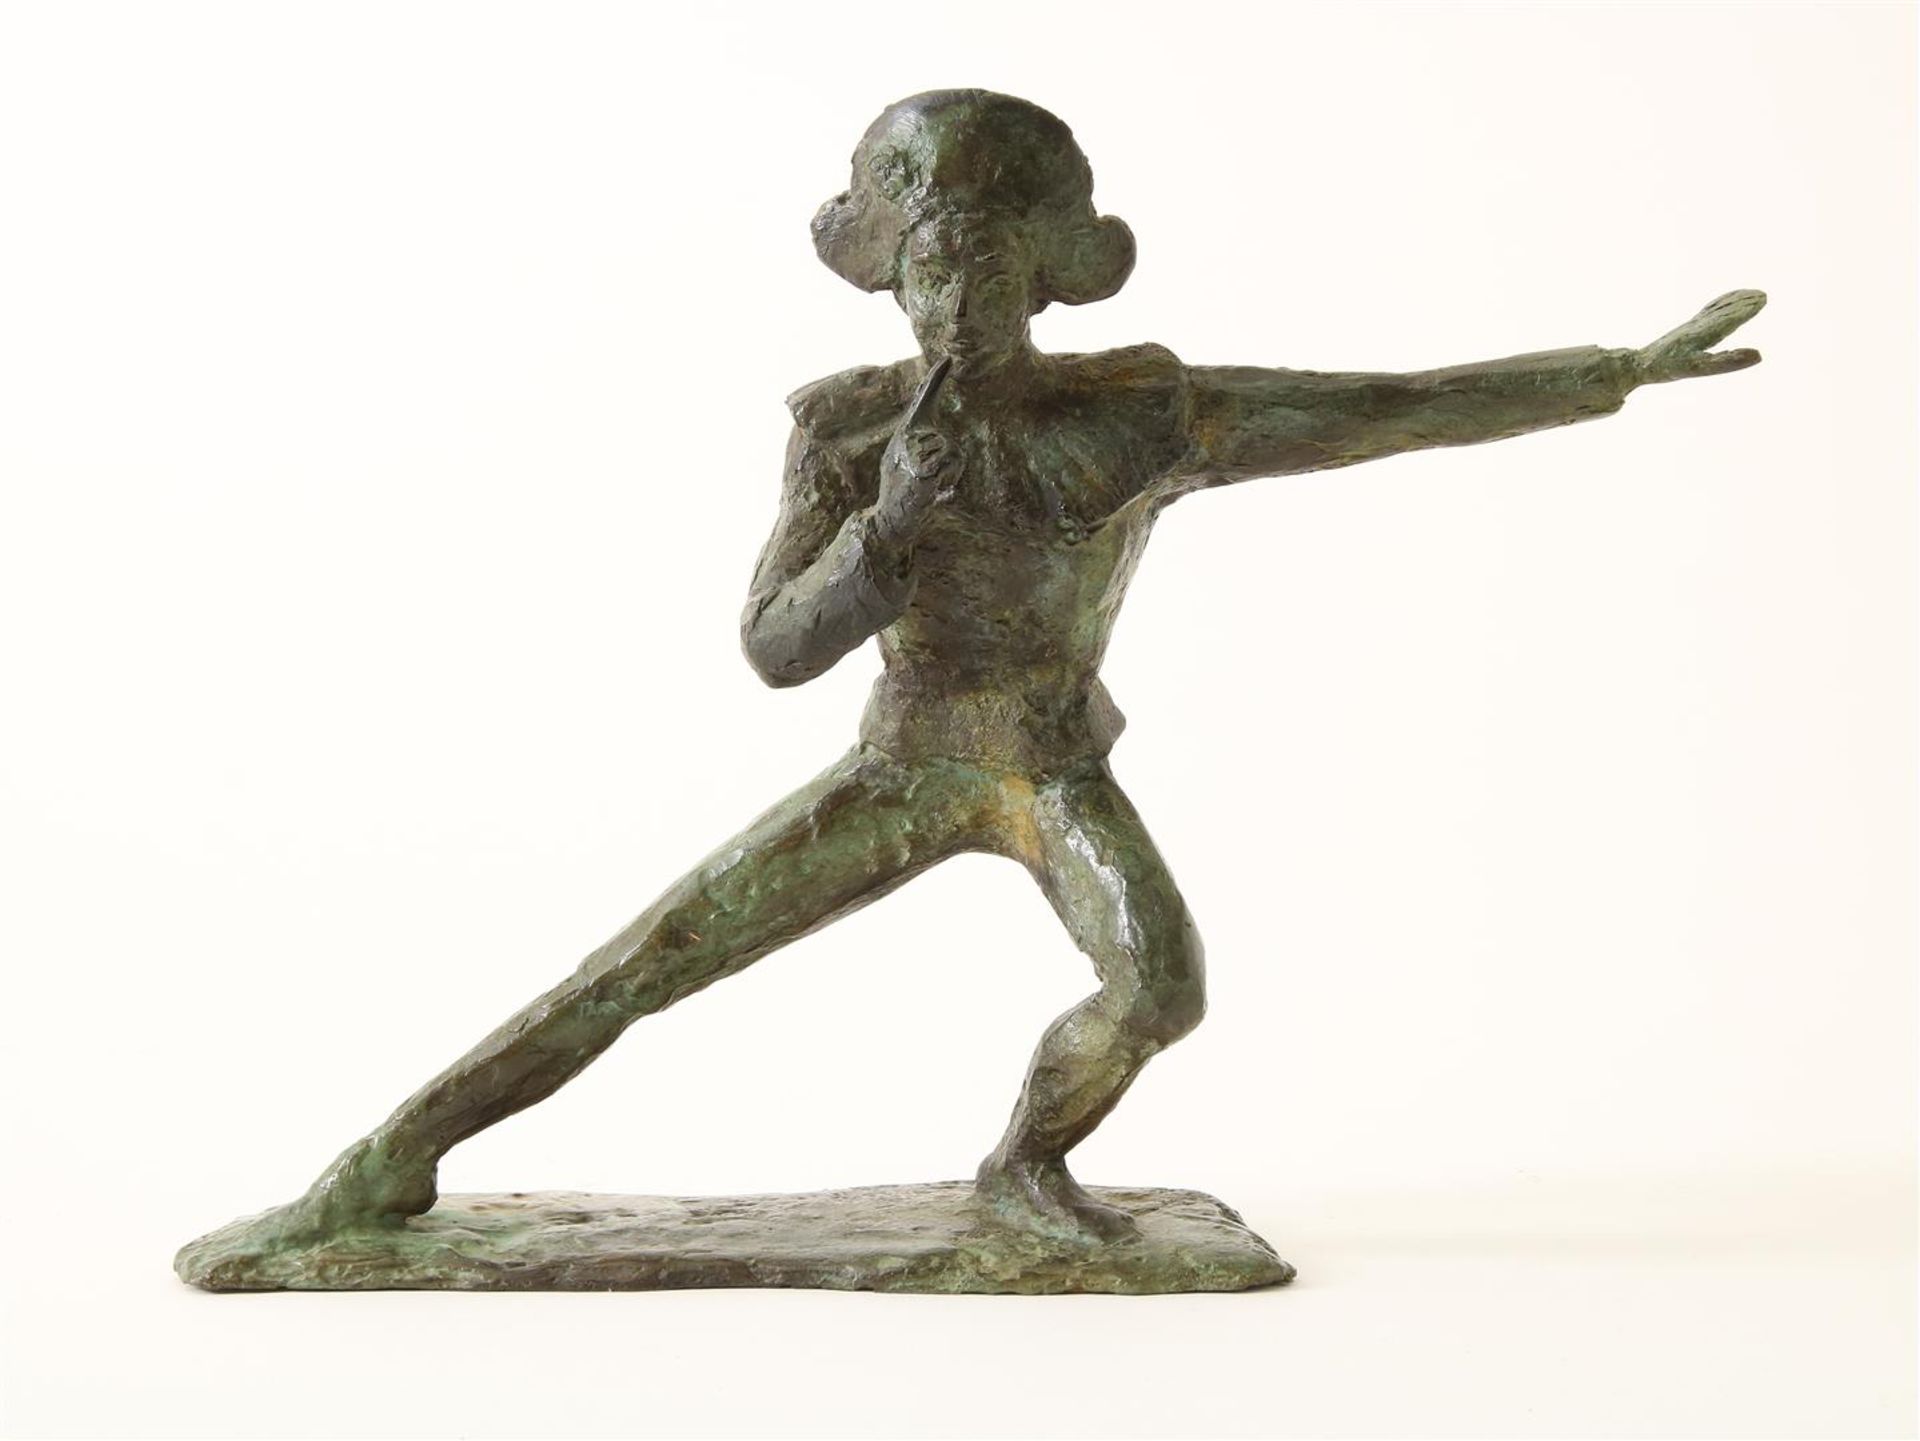 Merle Carvalho (1949-) "Scapino", signed on base, bronze, 24 x 22 x 9 cm. The statue was presented